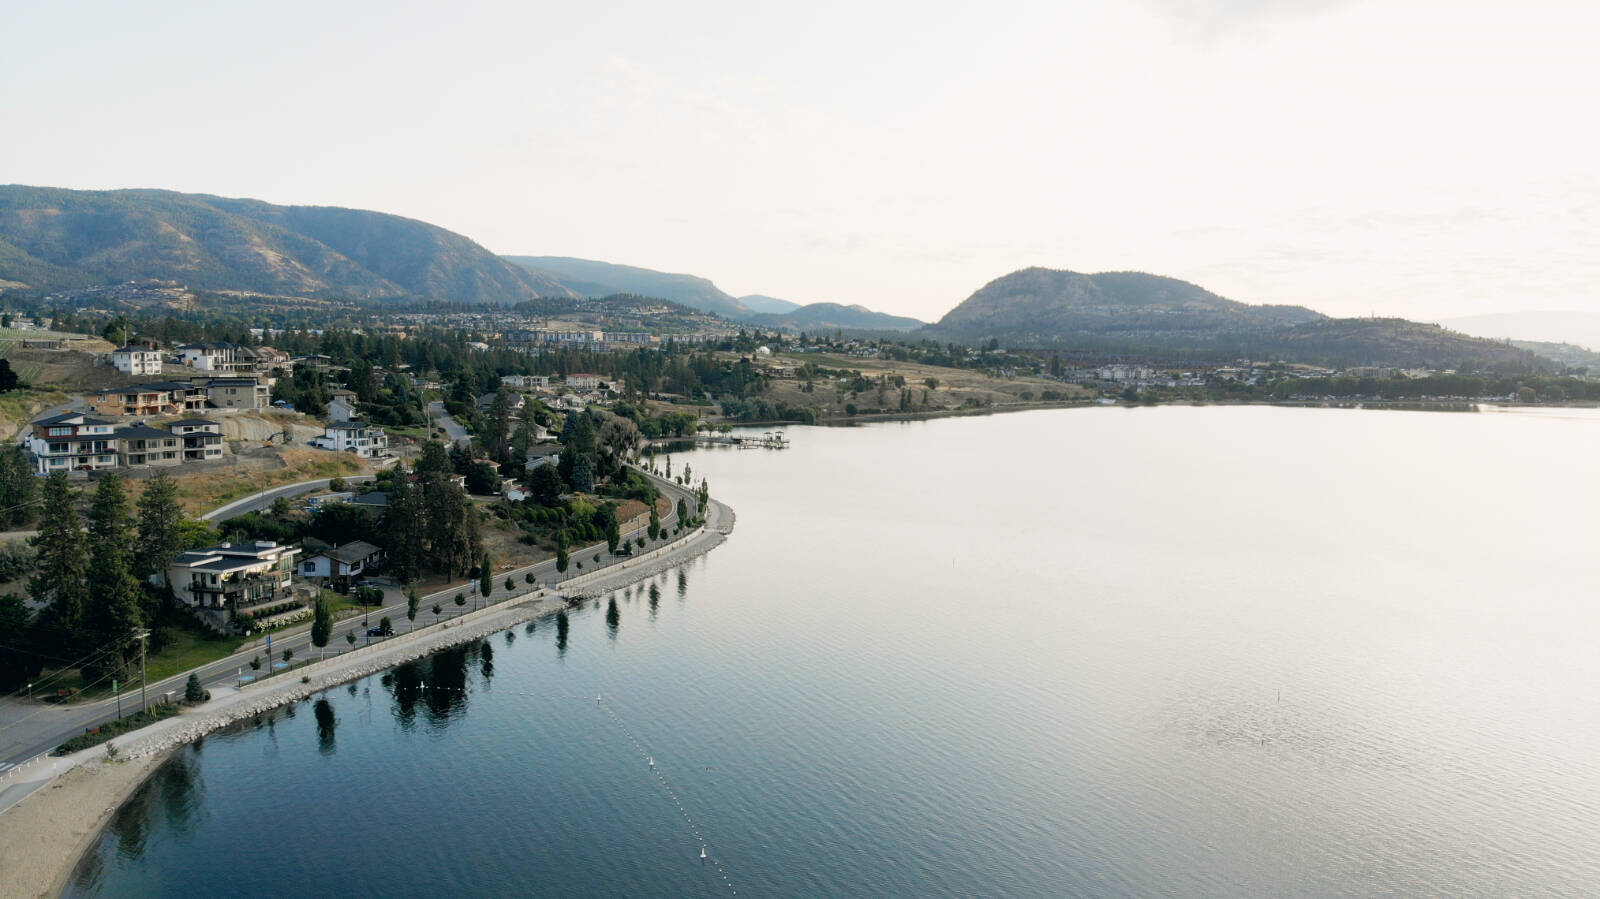 In case you needed another reason to visit Kelowna, the BC Ale Trail has launched the Kelowna Tasting Passport – and the chance to win some great prizes! BC Ale Trail photo